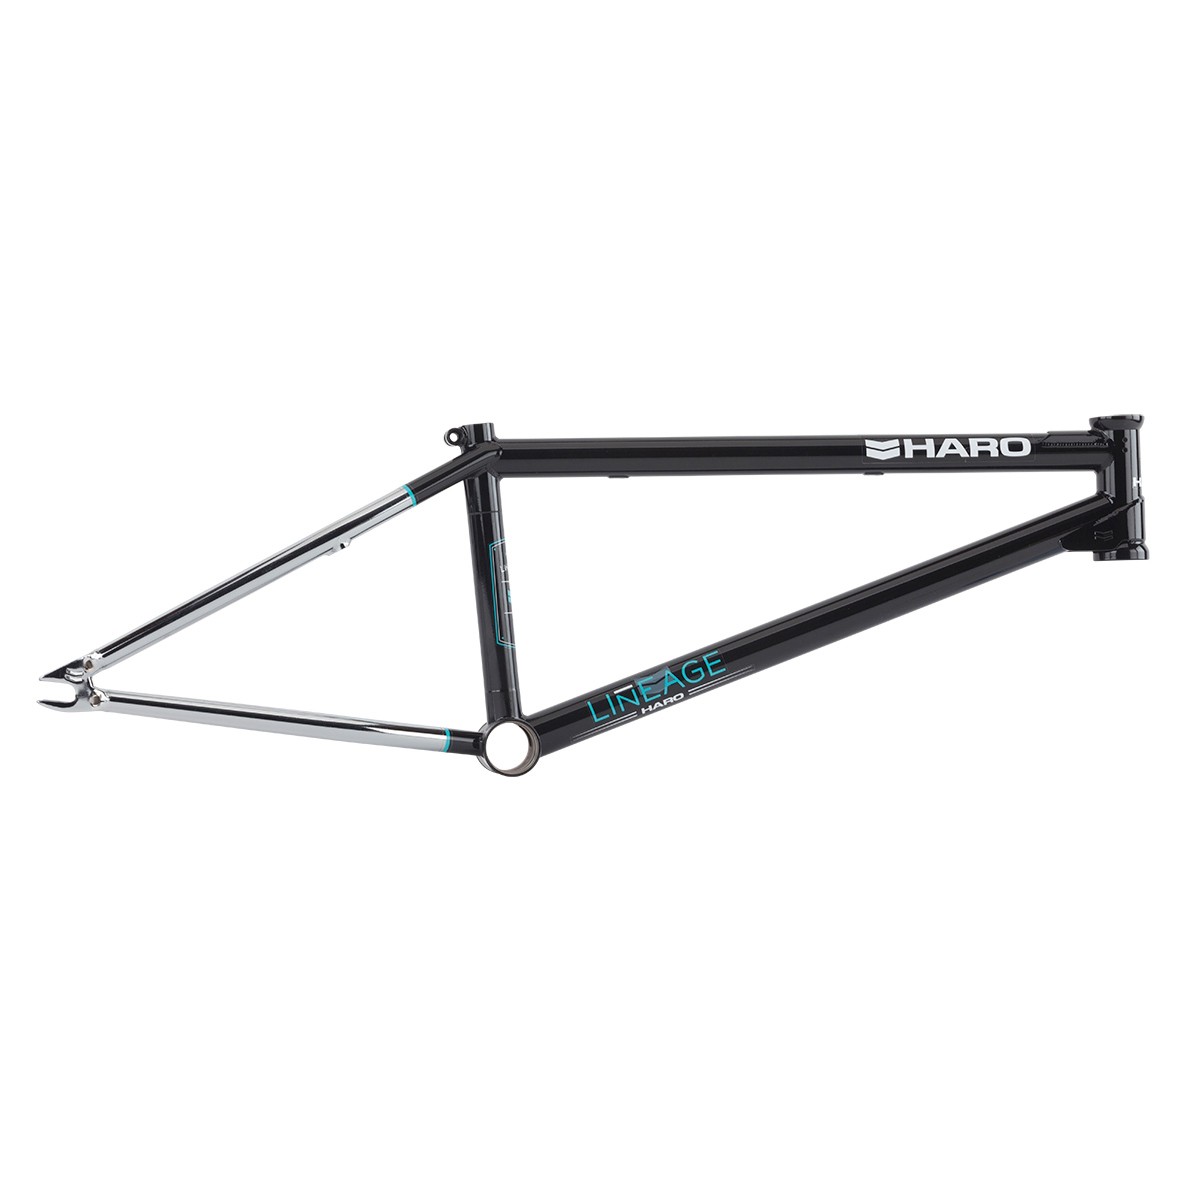 haro lineage frame